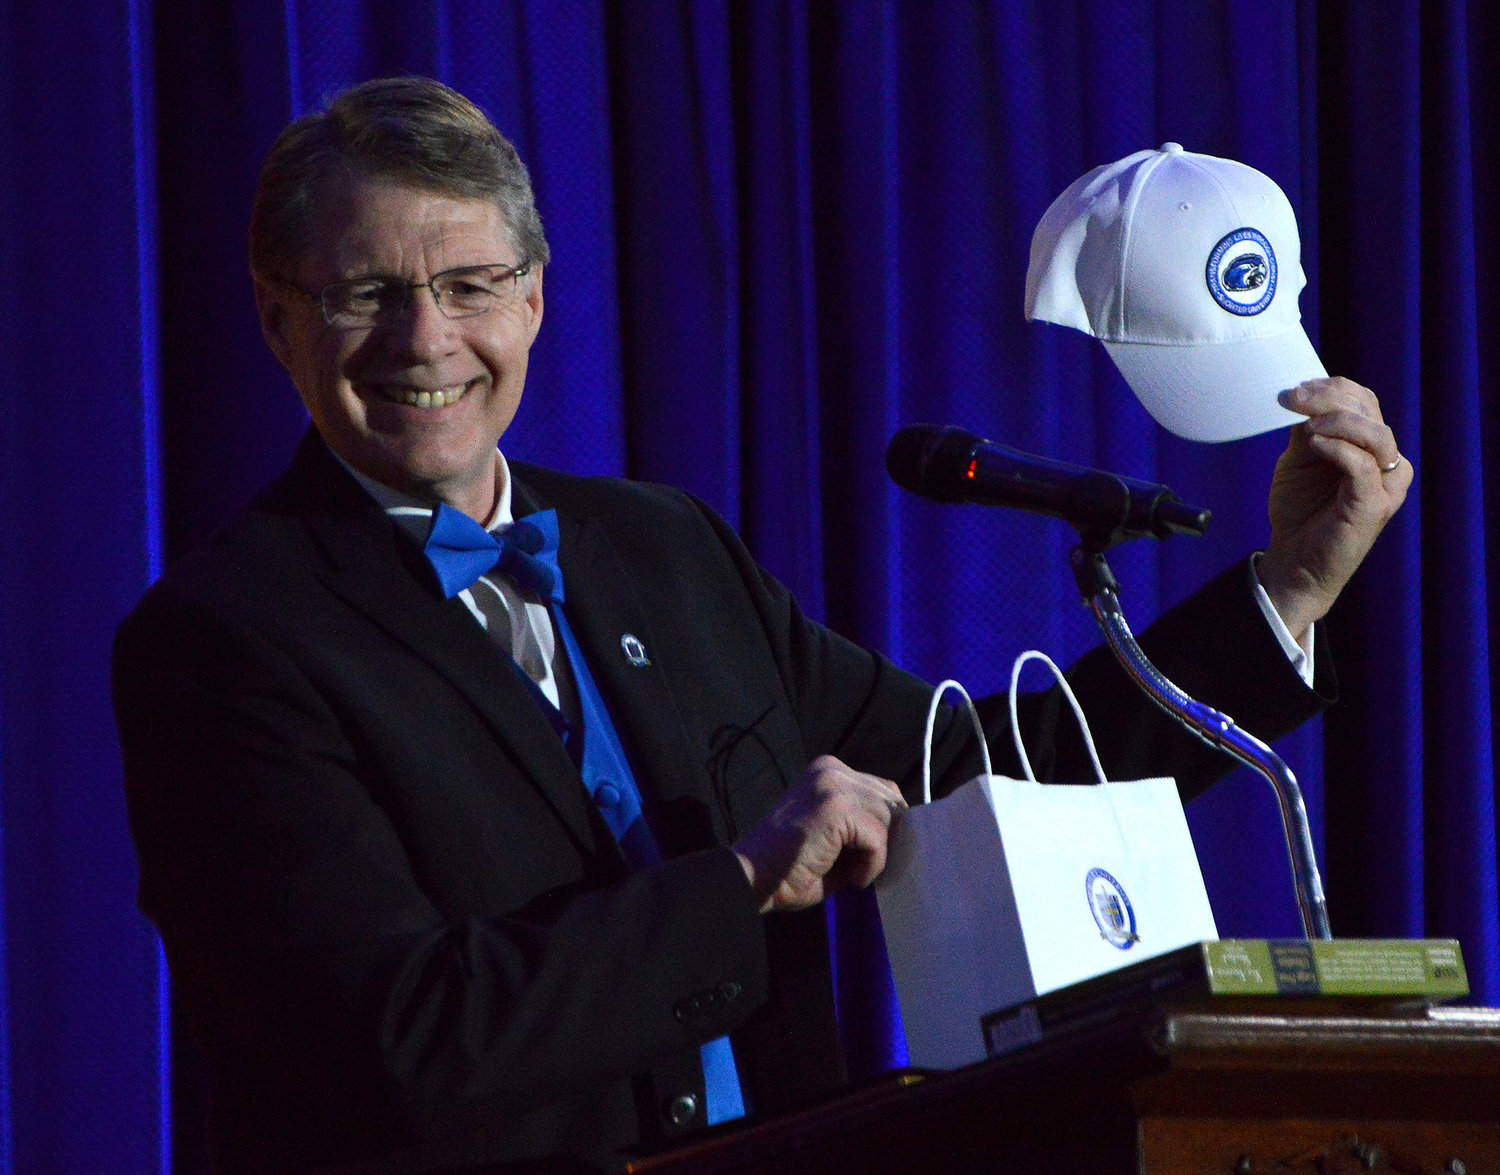 Shorter University President Dr. Don Dowless holds up a Shorter baseball cap that he presented to Darryl Strawberry at the President’s Gala in Rome, Ga., Dec. 1, 2022. (Index/Henry Durand)